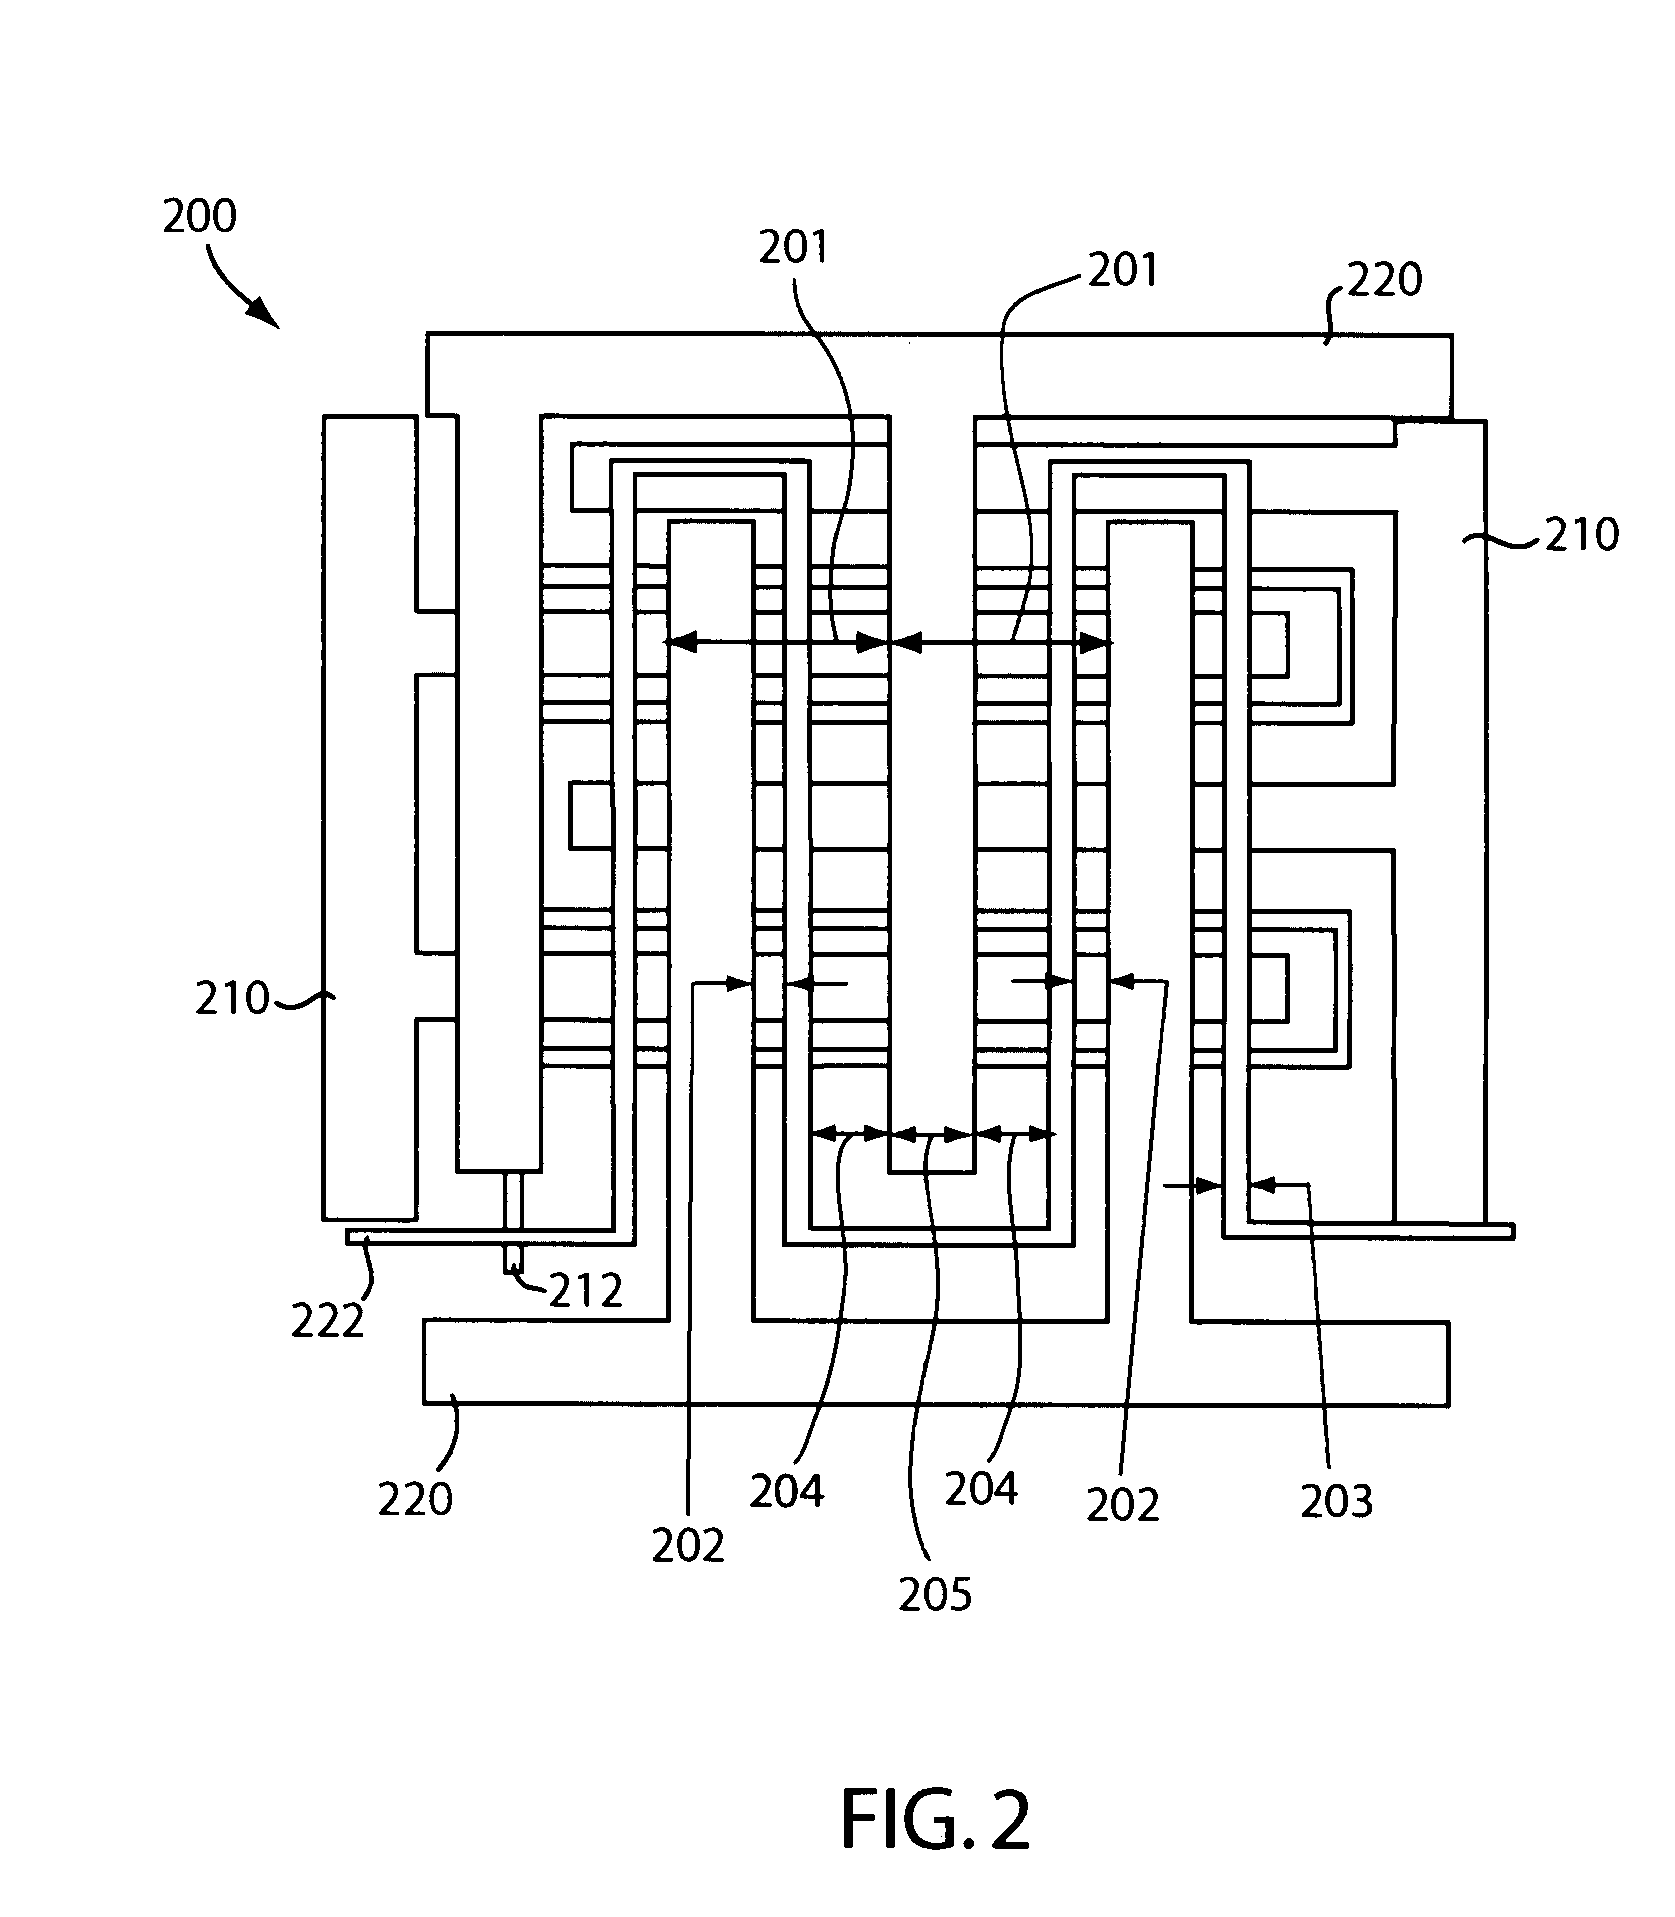 Monitoring and control of integrated circuit device fabrication processes